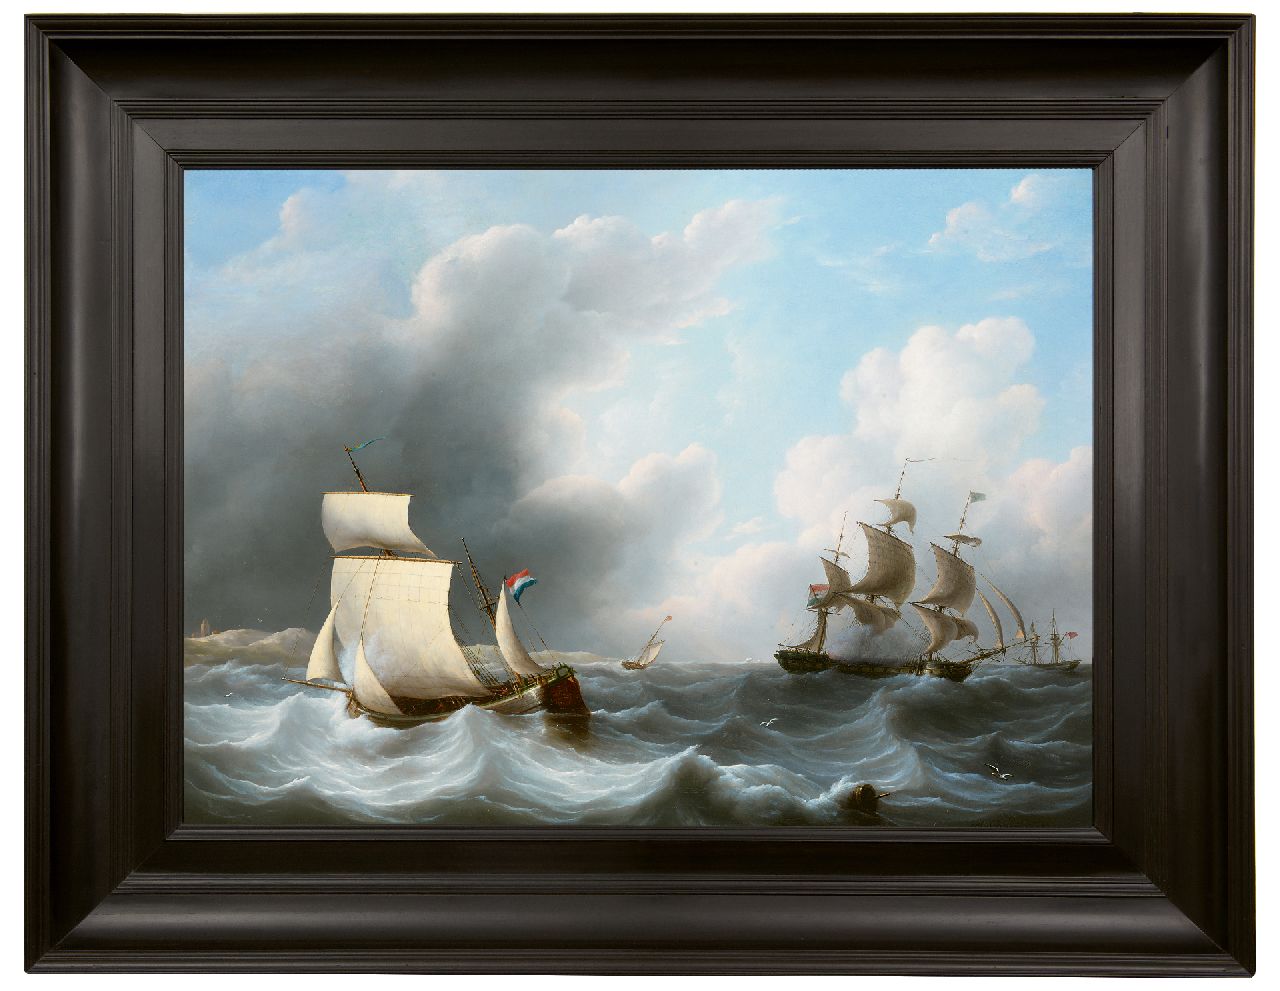 Schouman M.  | Martinus Schouman | Paintings offered for sale | Sailing vessels in choppy seas, oil on canvas 72.0 x 98.5 cm, signed l.r. and painted ca. 1810-1820